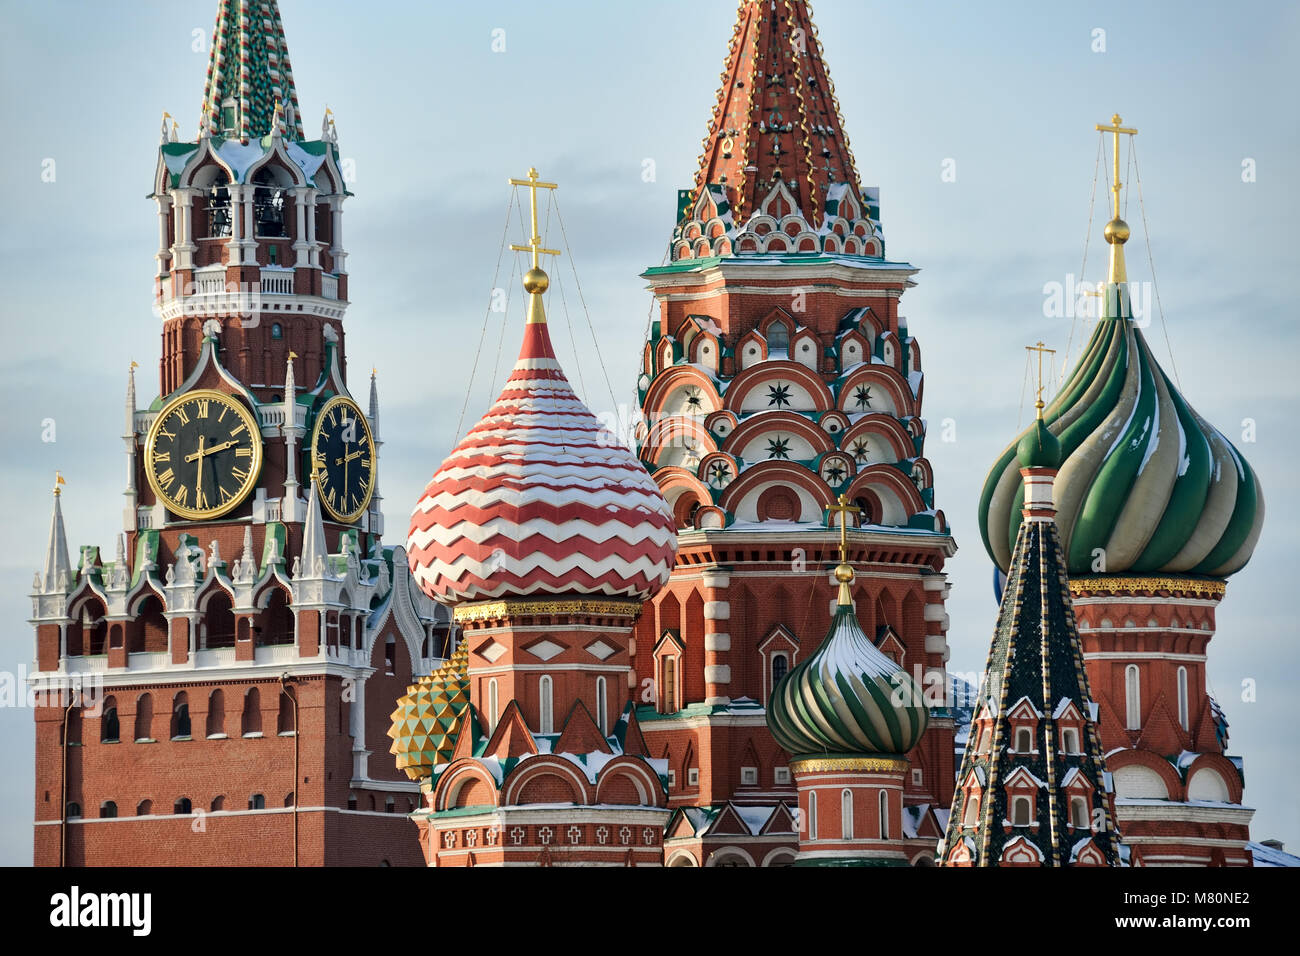 MOSCOW, RUSSIA - Kremlin Clock Tower & Onion Domes of St. Basil’s Cathedral in Winter Stock Photo